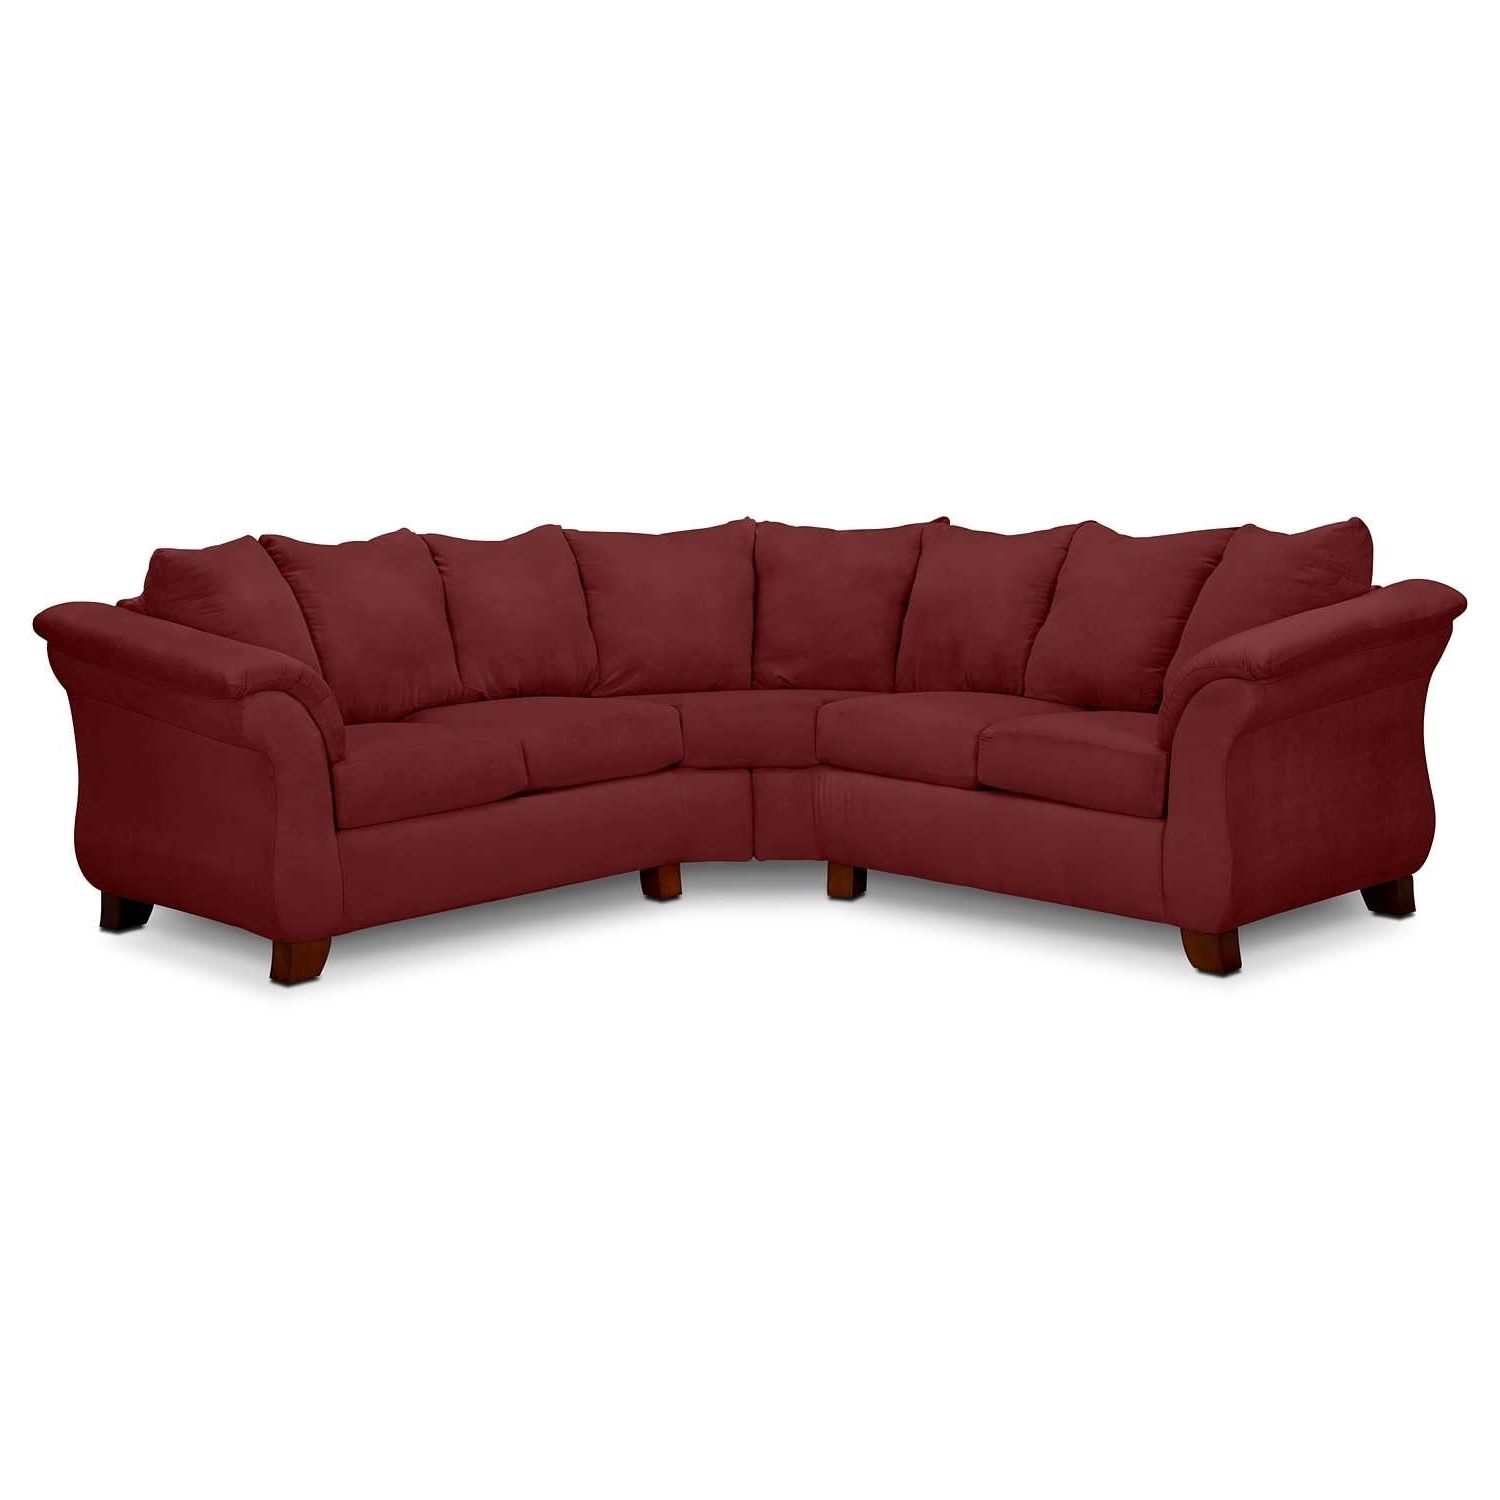 Sofa : 2 Piece Sofa Small Sectional With Chaise Sectionals For Pertaining To Current Chaise Sectionals (View 12 of 15)